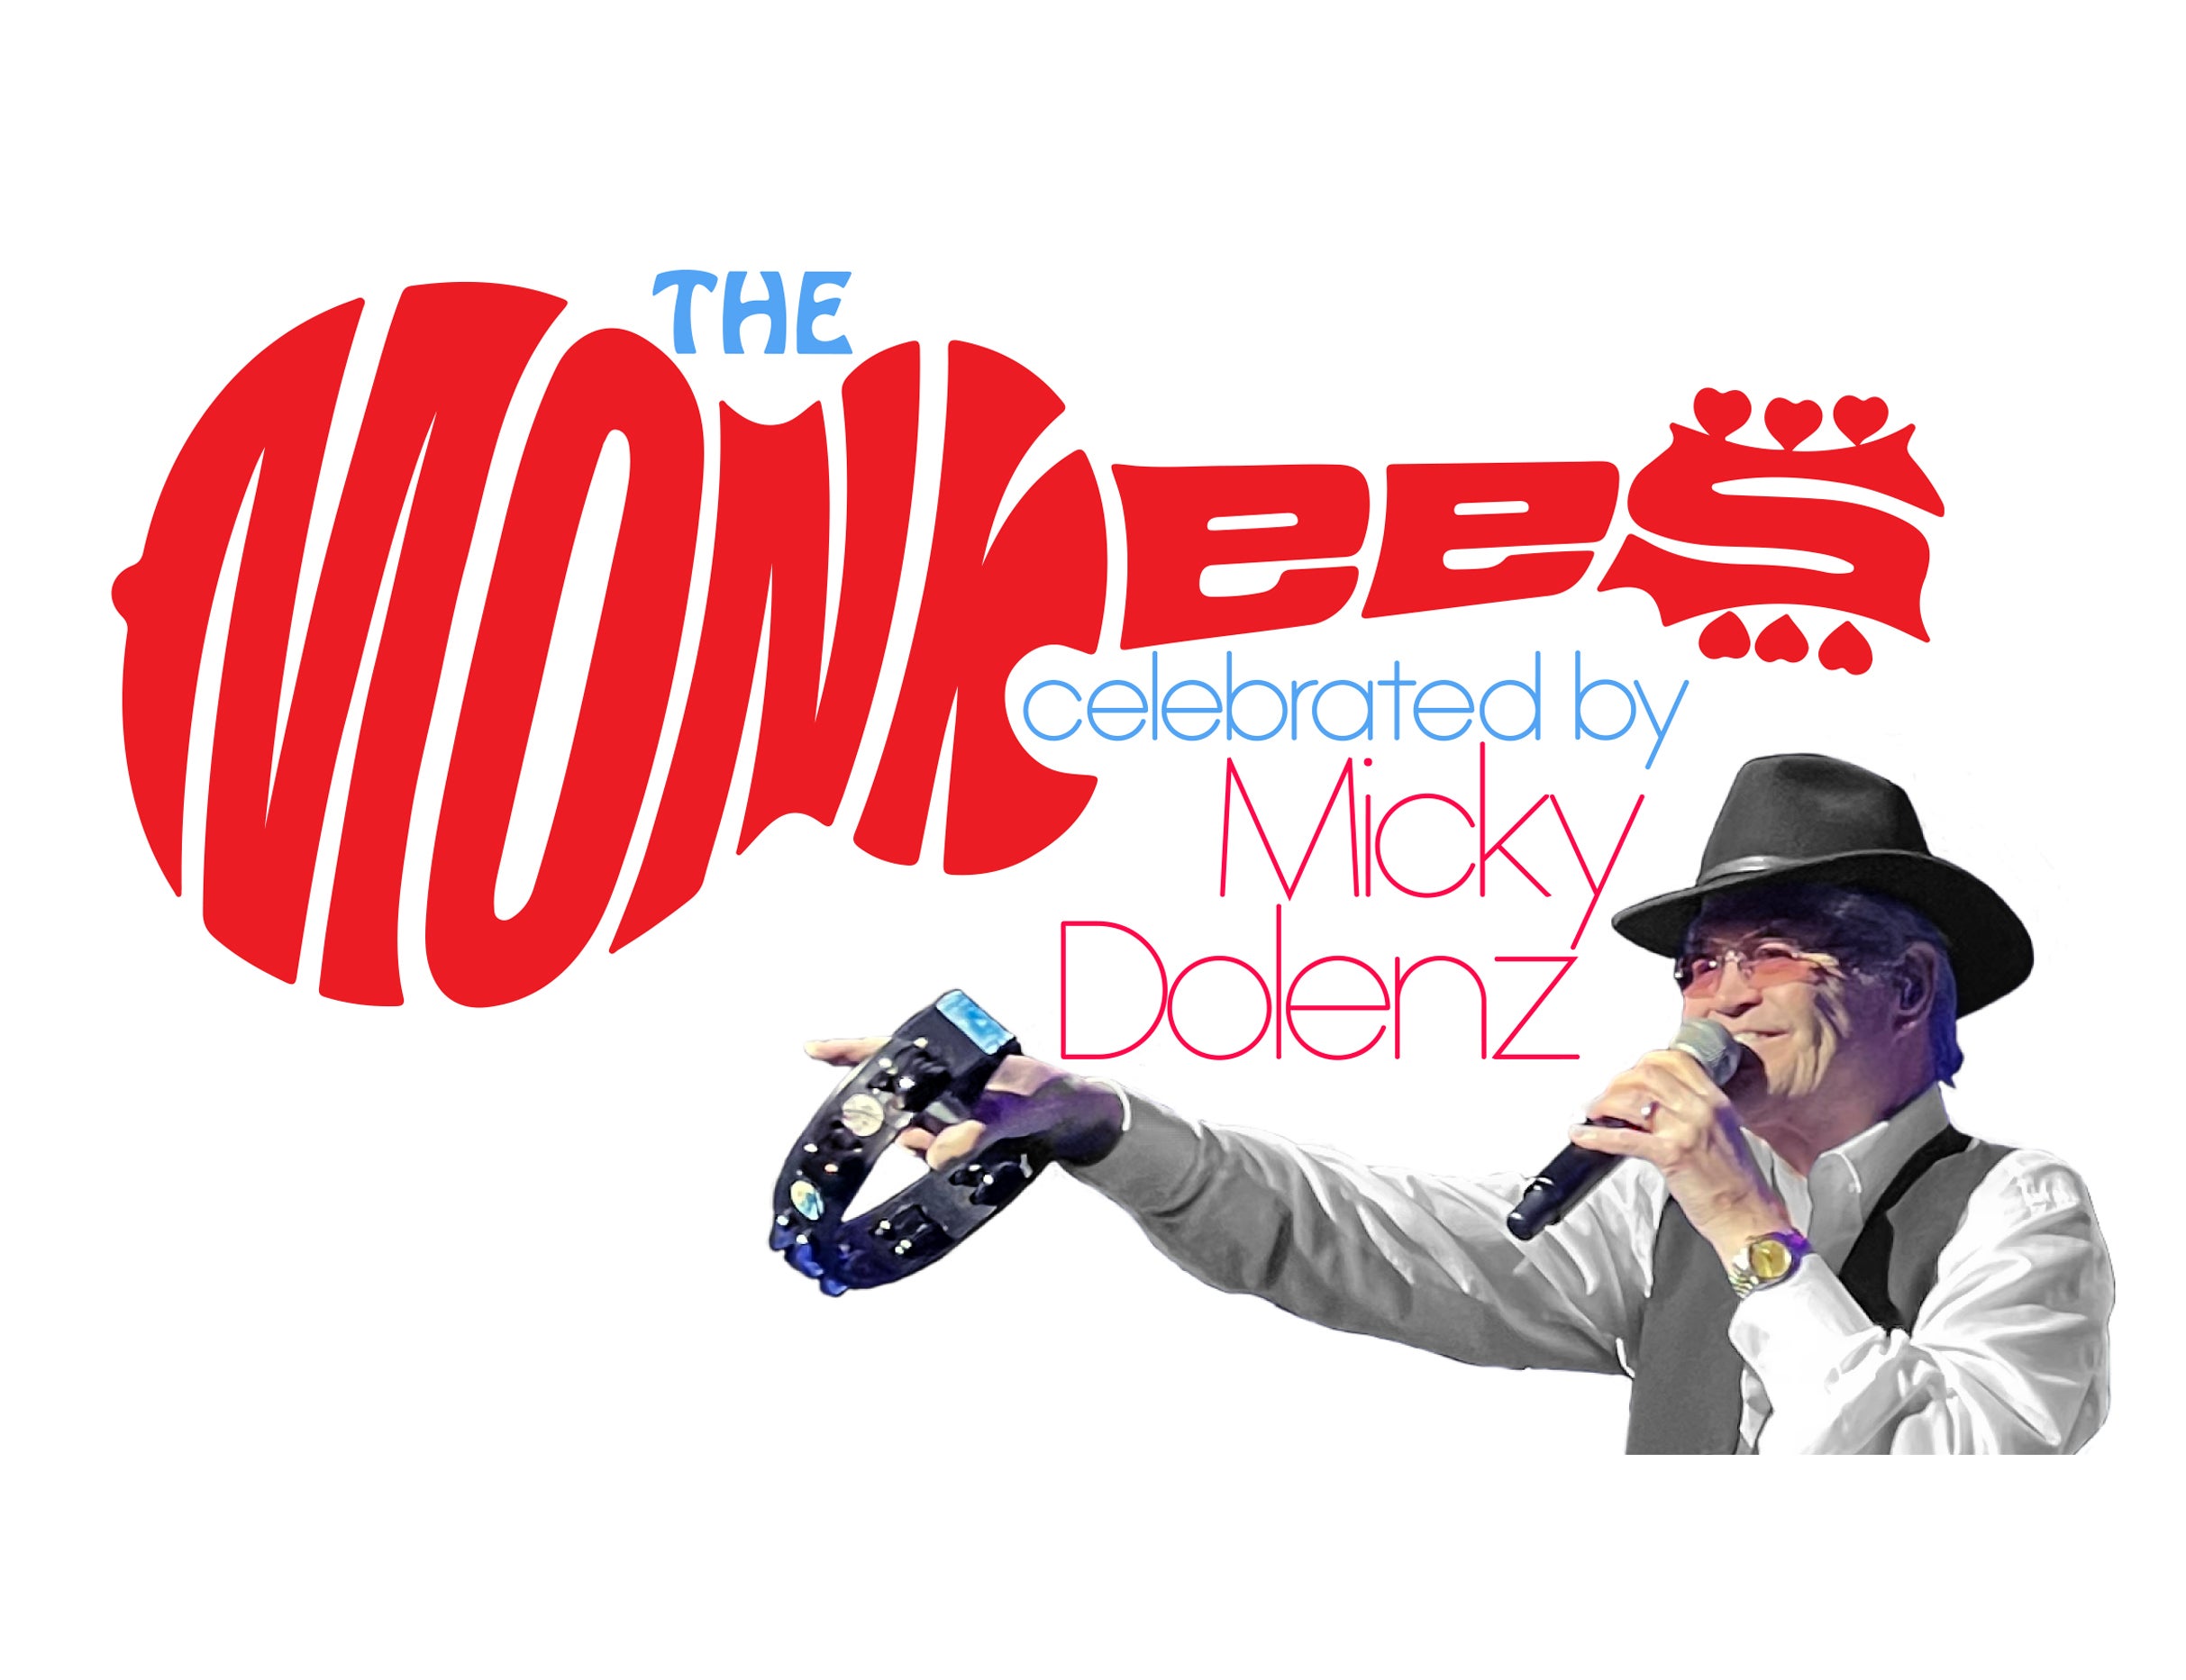 The Monkees Celebrated By Micky Dolenz in Minneapolis promo photo for Promotor presale offer code